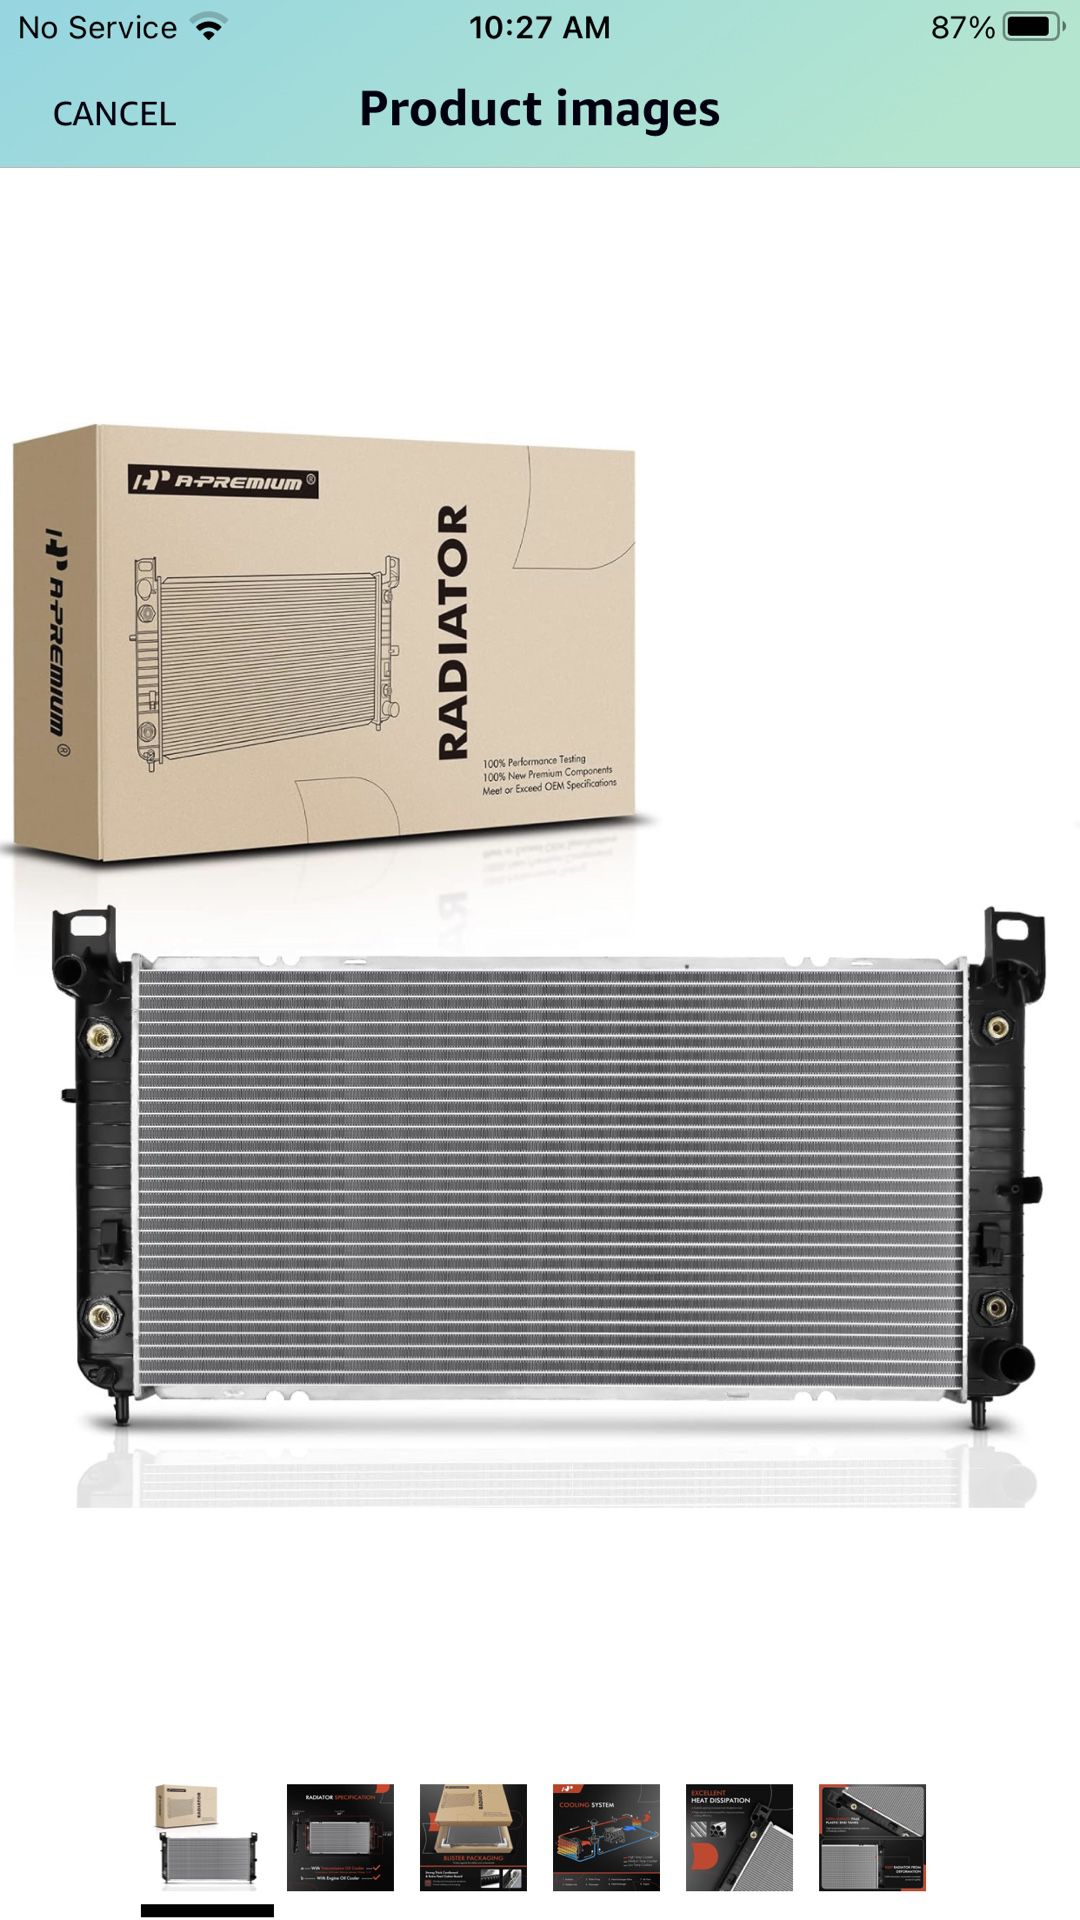 A-Premium Engine Coolant Radiator Assembly with Oil Cooler Compatible with Chevy Silverado, Suburban, Tahoe & GMC Sierra, Yukon & Cadillac Escalade, A